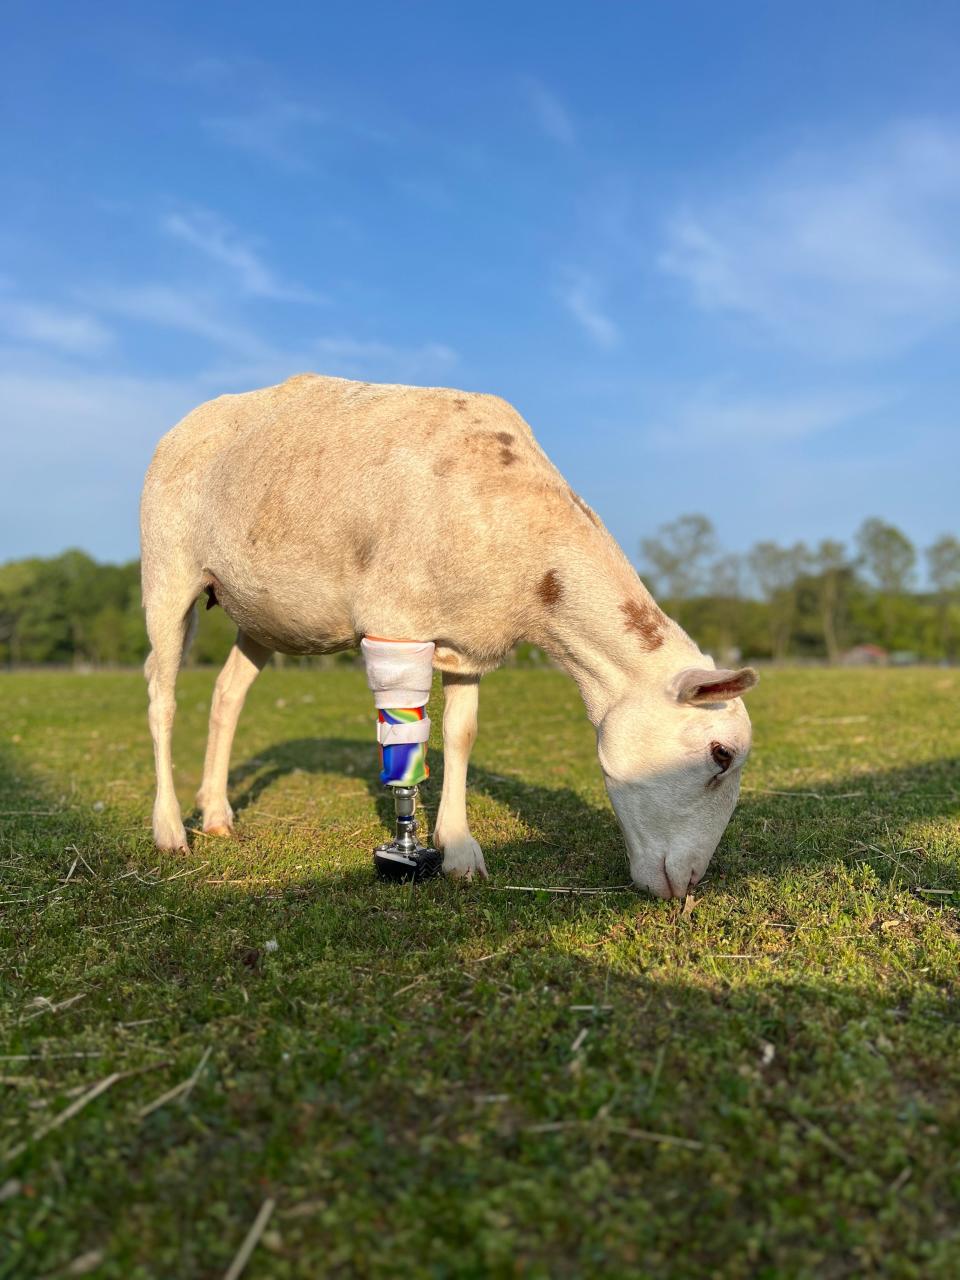 A sheep with a prosthetic leg grazes at the Woodstock Farm Sanctuary.